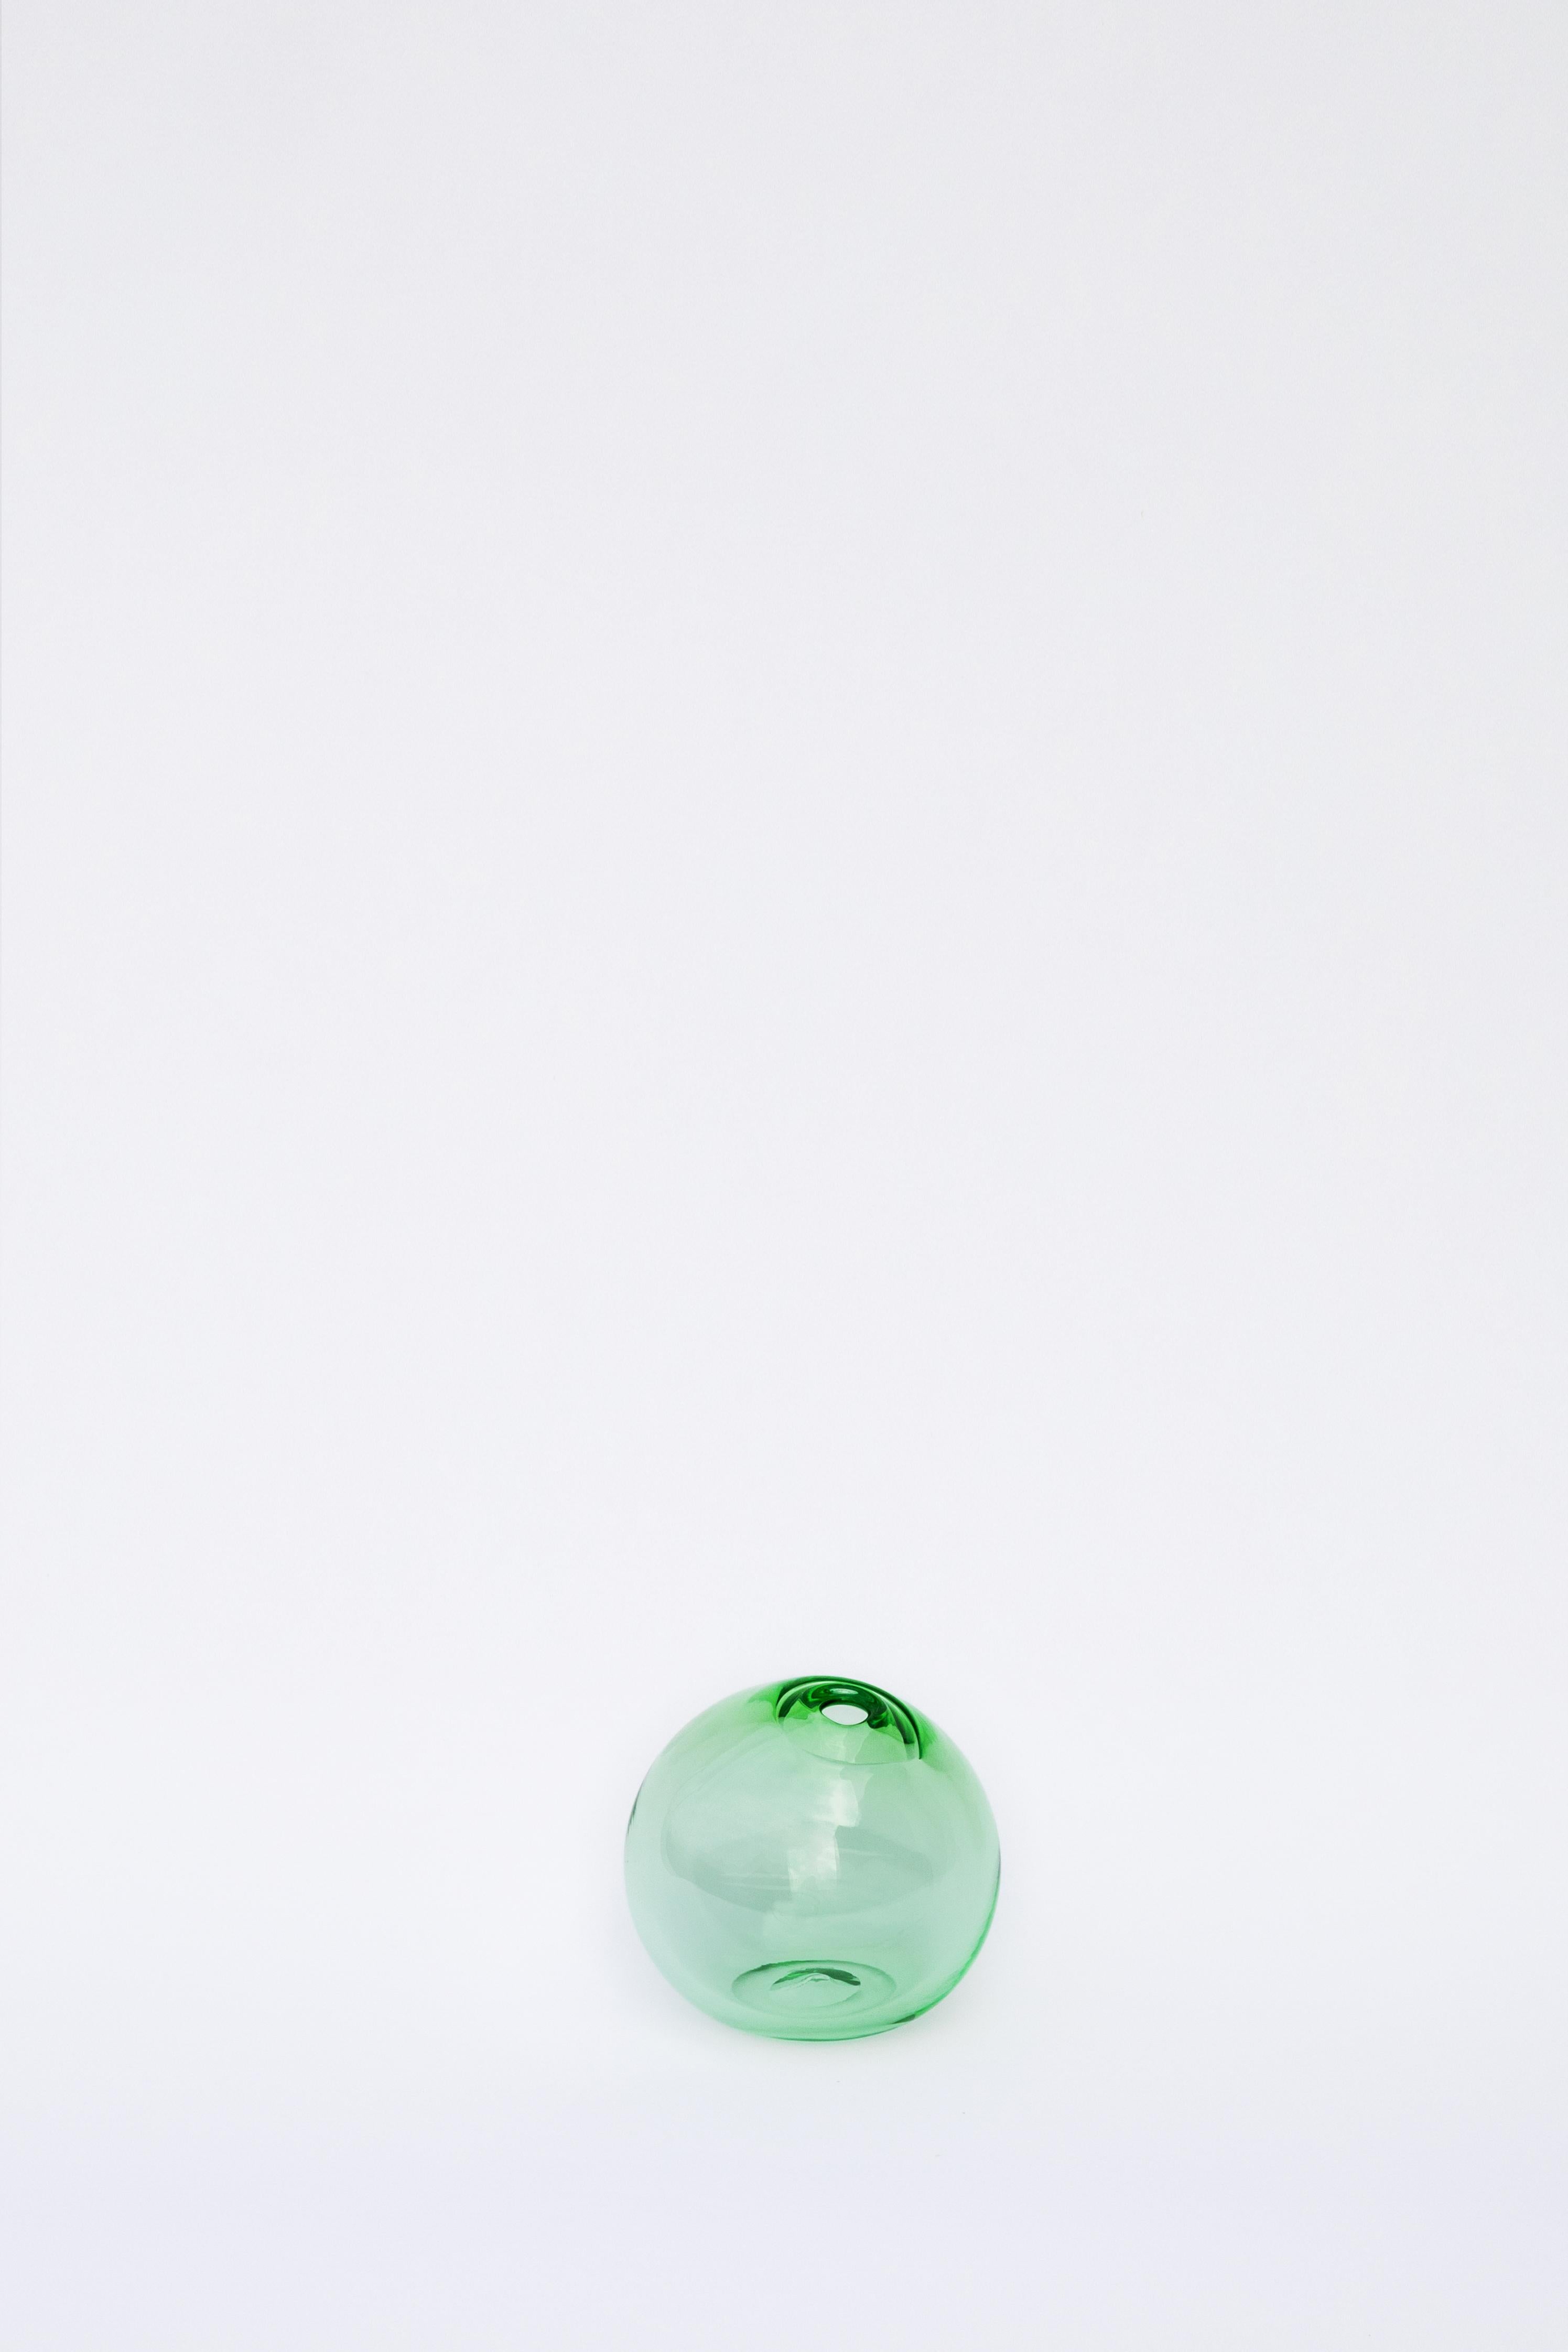 Light green float vessel 6 by SkLO
Dimensions: D 15 cm
Materials: Glass
Color: Light green
Available in 5 sizes: 15cm, 20cm, 30cm, 41cm, 51cm. Each size is available in 2 different colors.

Organic spheres of handblown Czech glass with broken